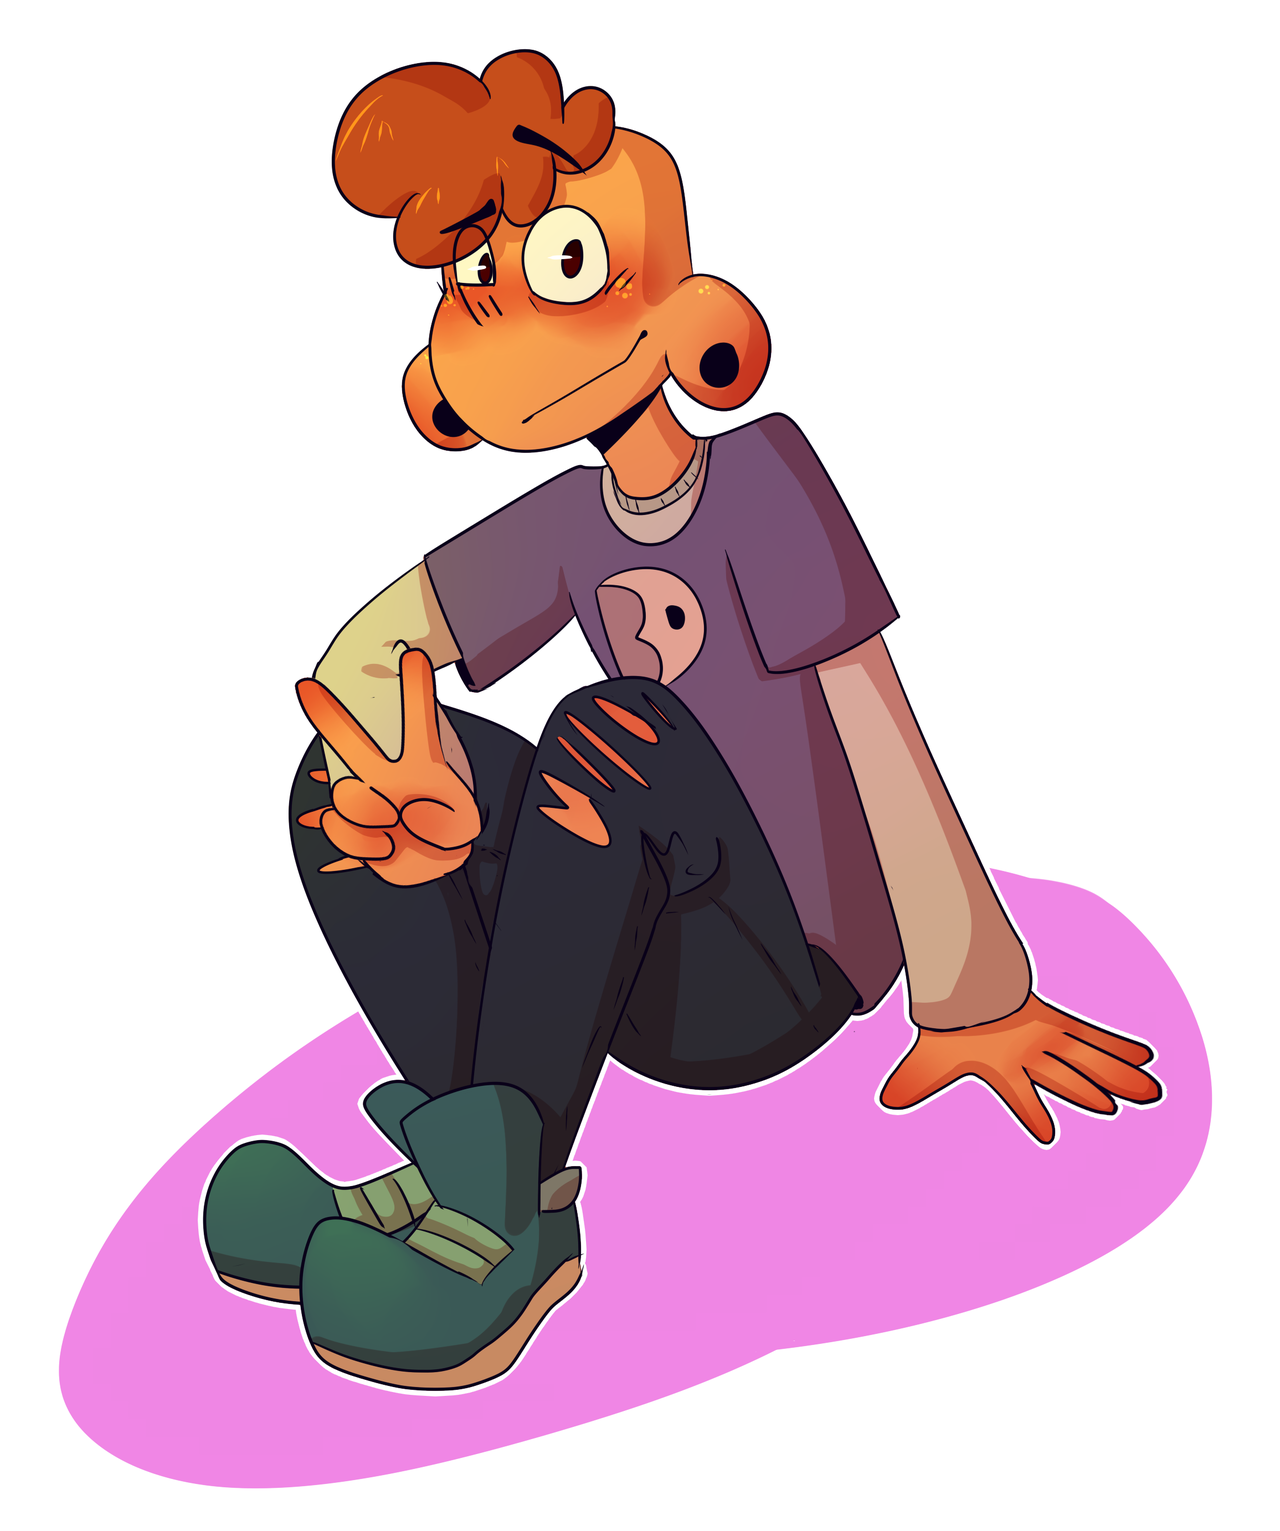 shadehlyne: I DID A LARS!  I think this is actually the first time ive completed